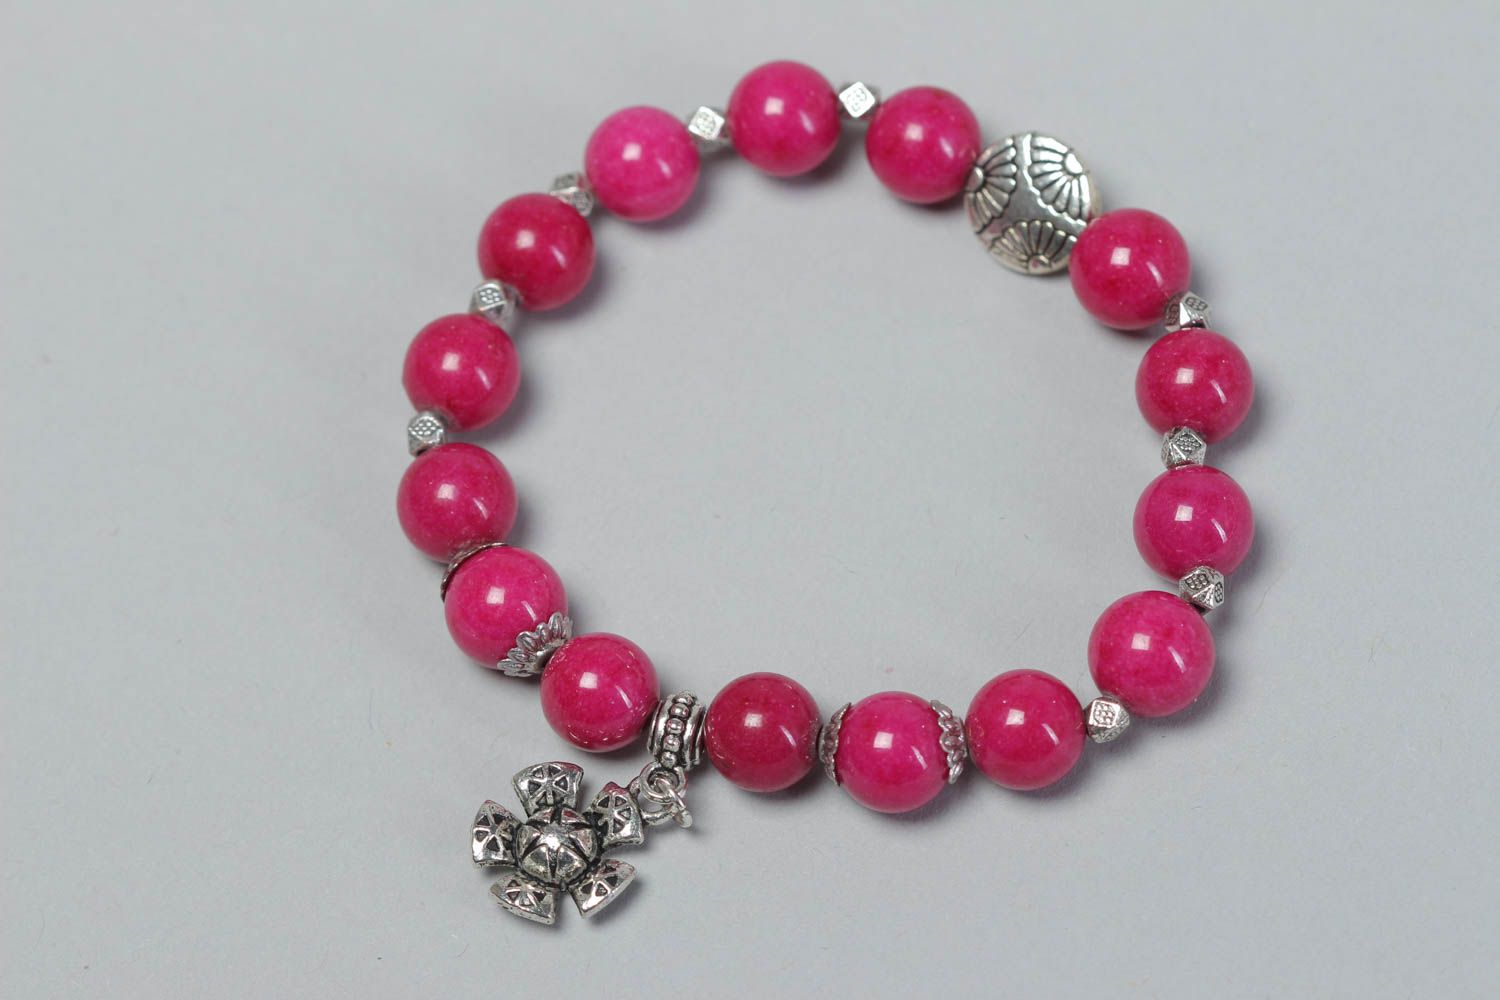 Handmade bracelet with charms stylish bright accessory cute pink jewelry photo 2